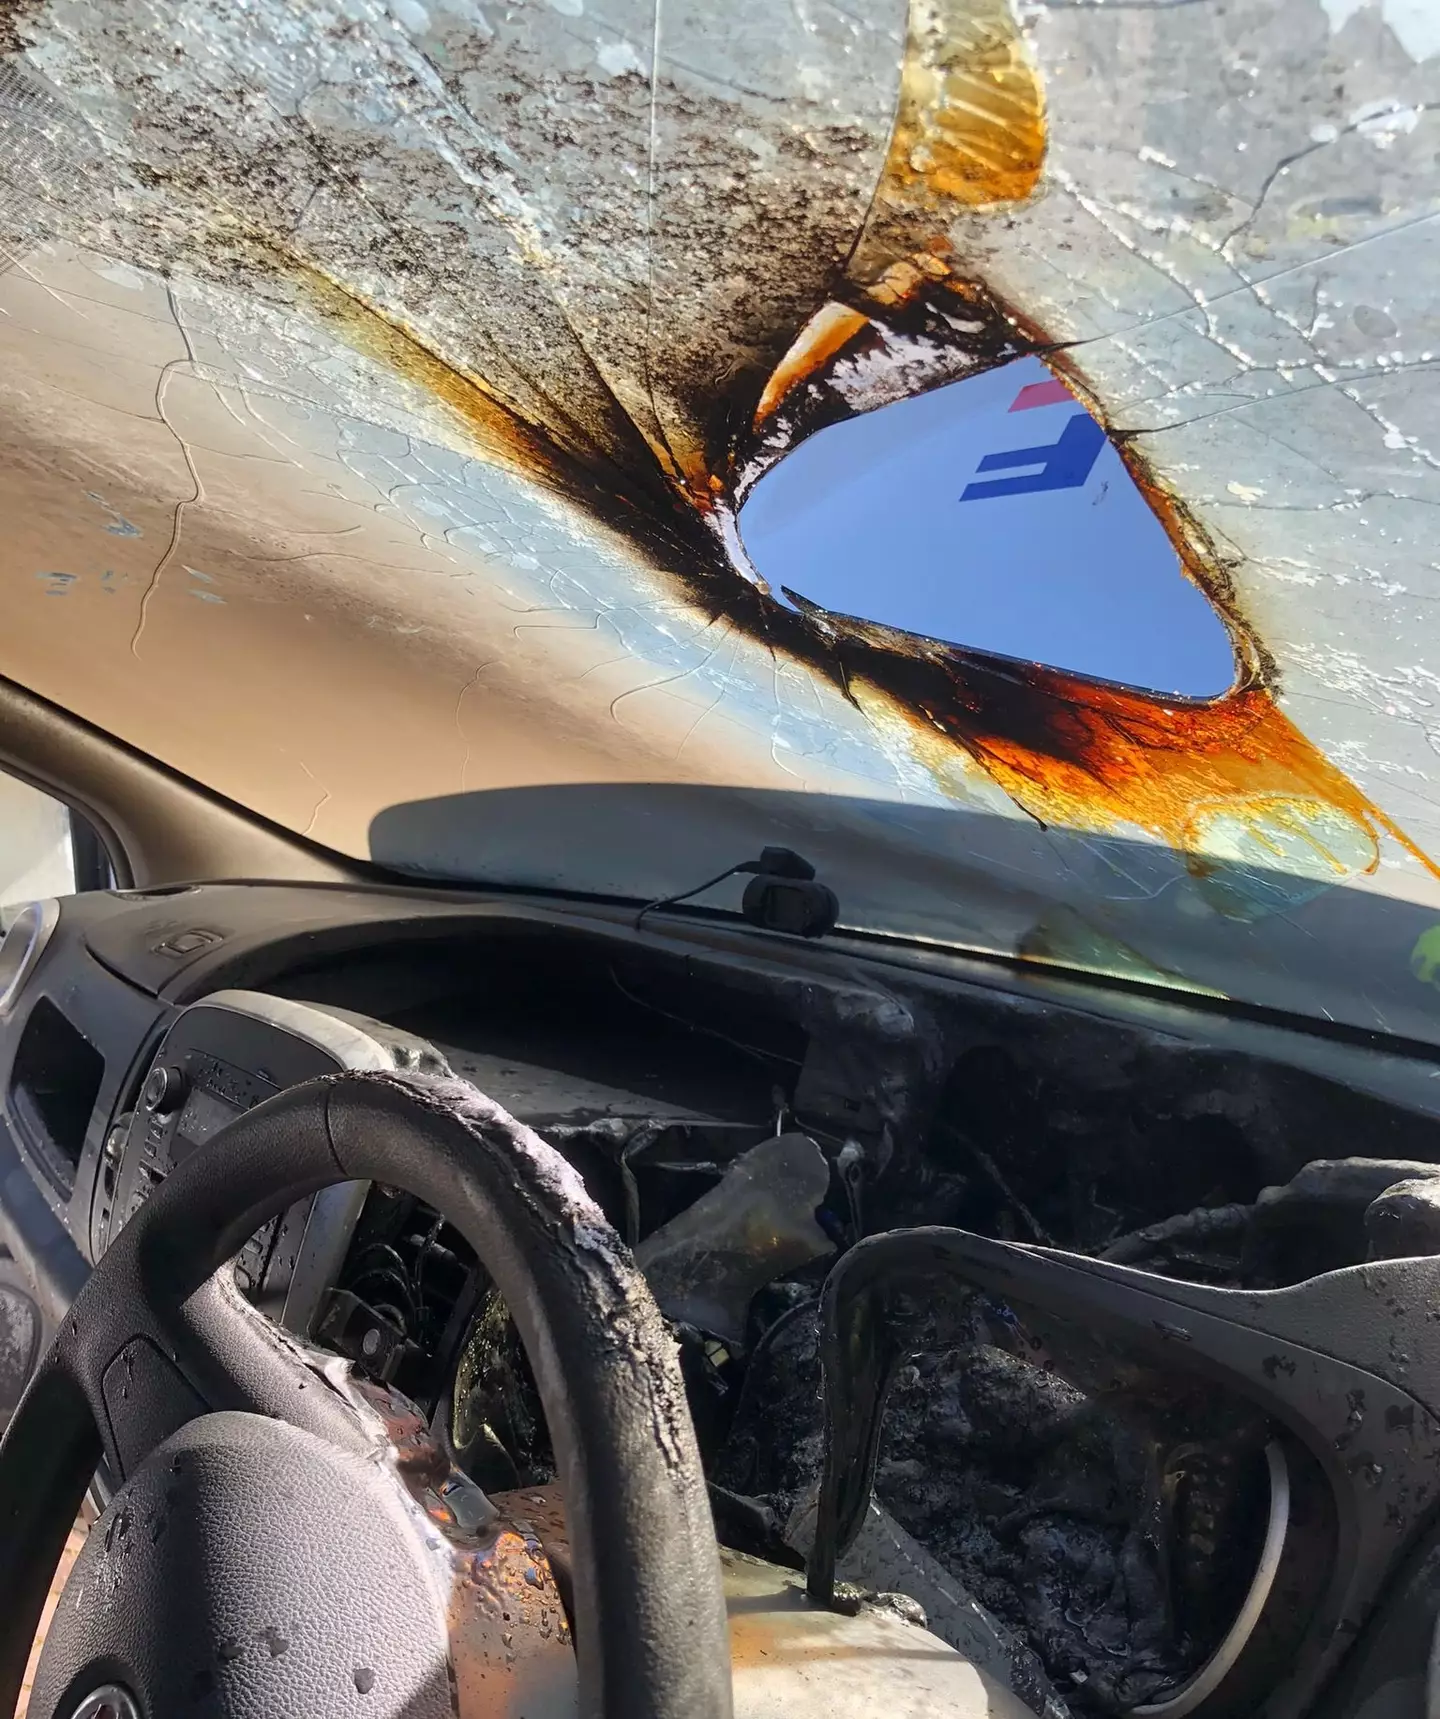 The car's interior completely melted in the heat.